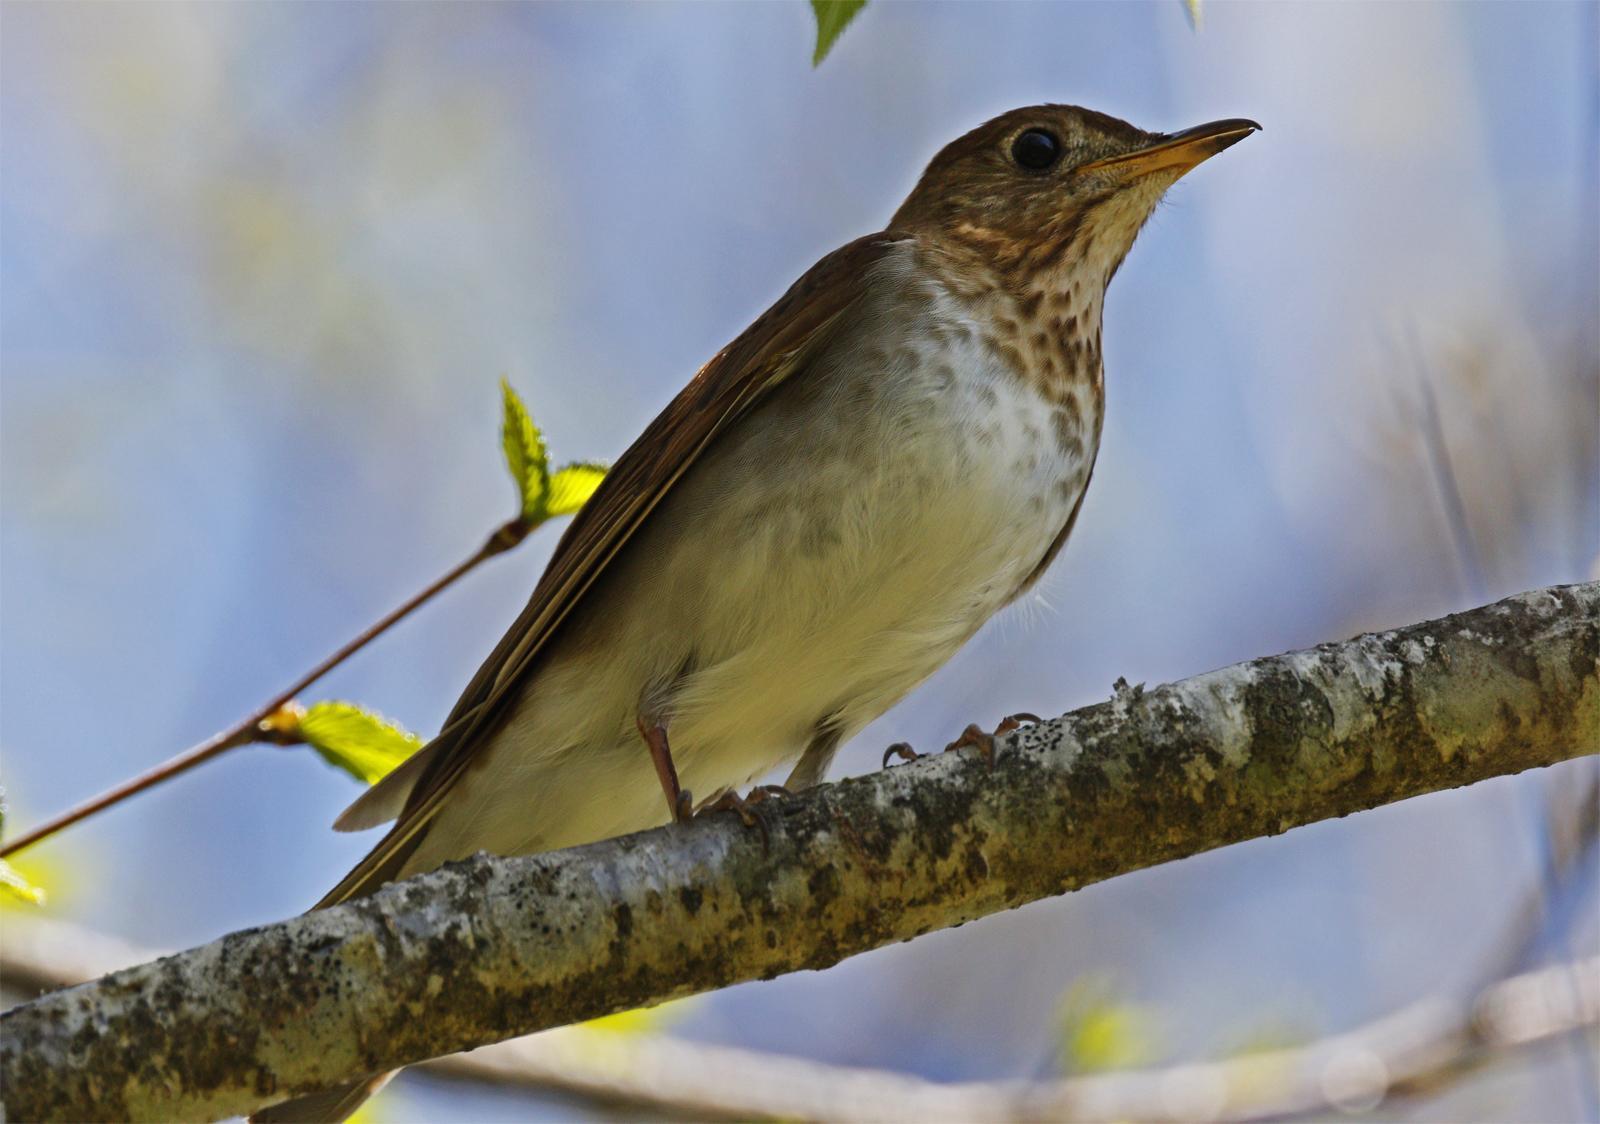 Veery Photo by Emily Willoughby